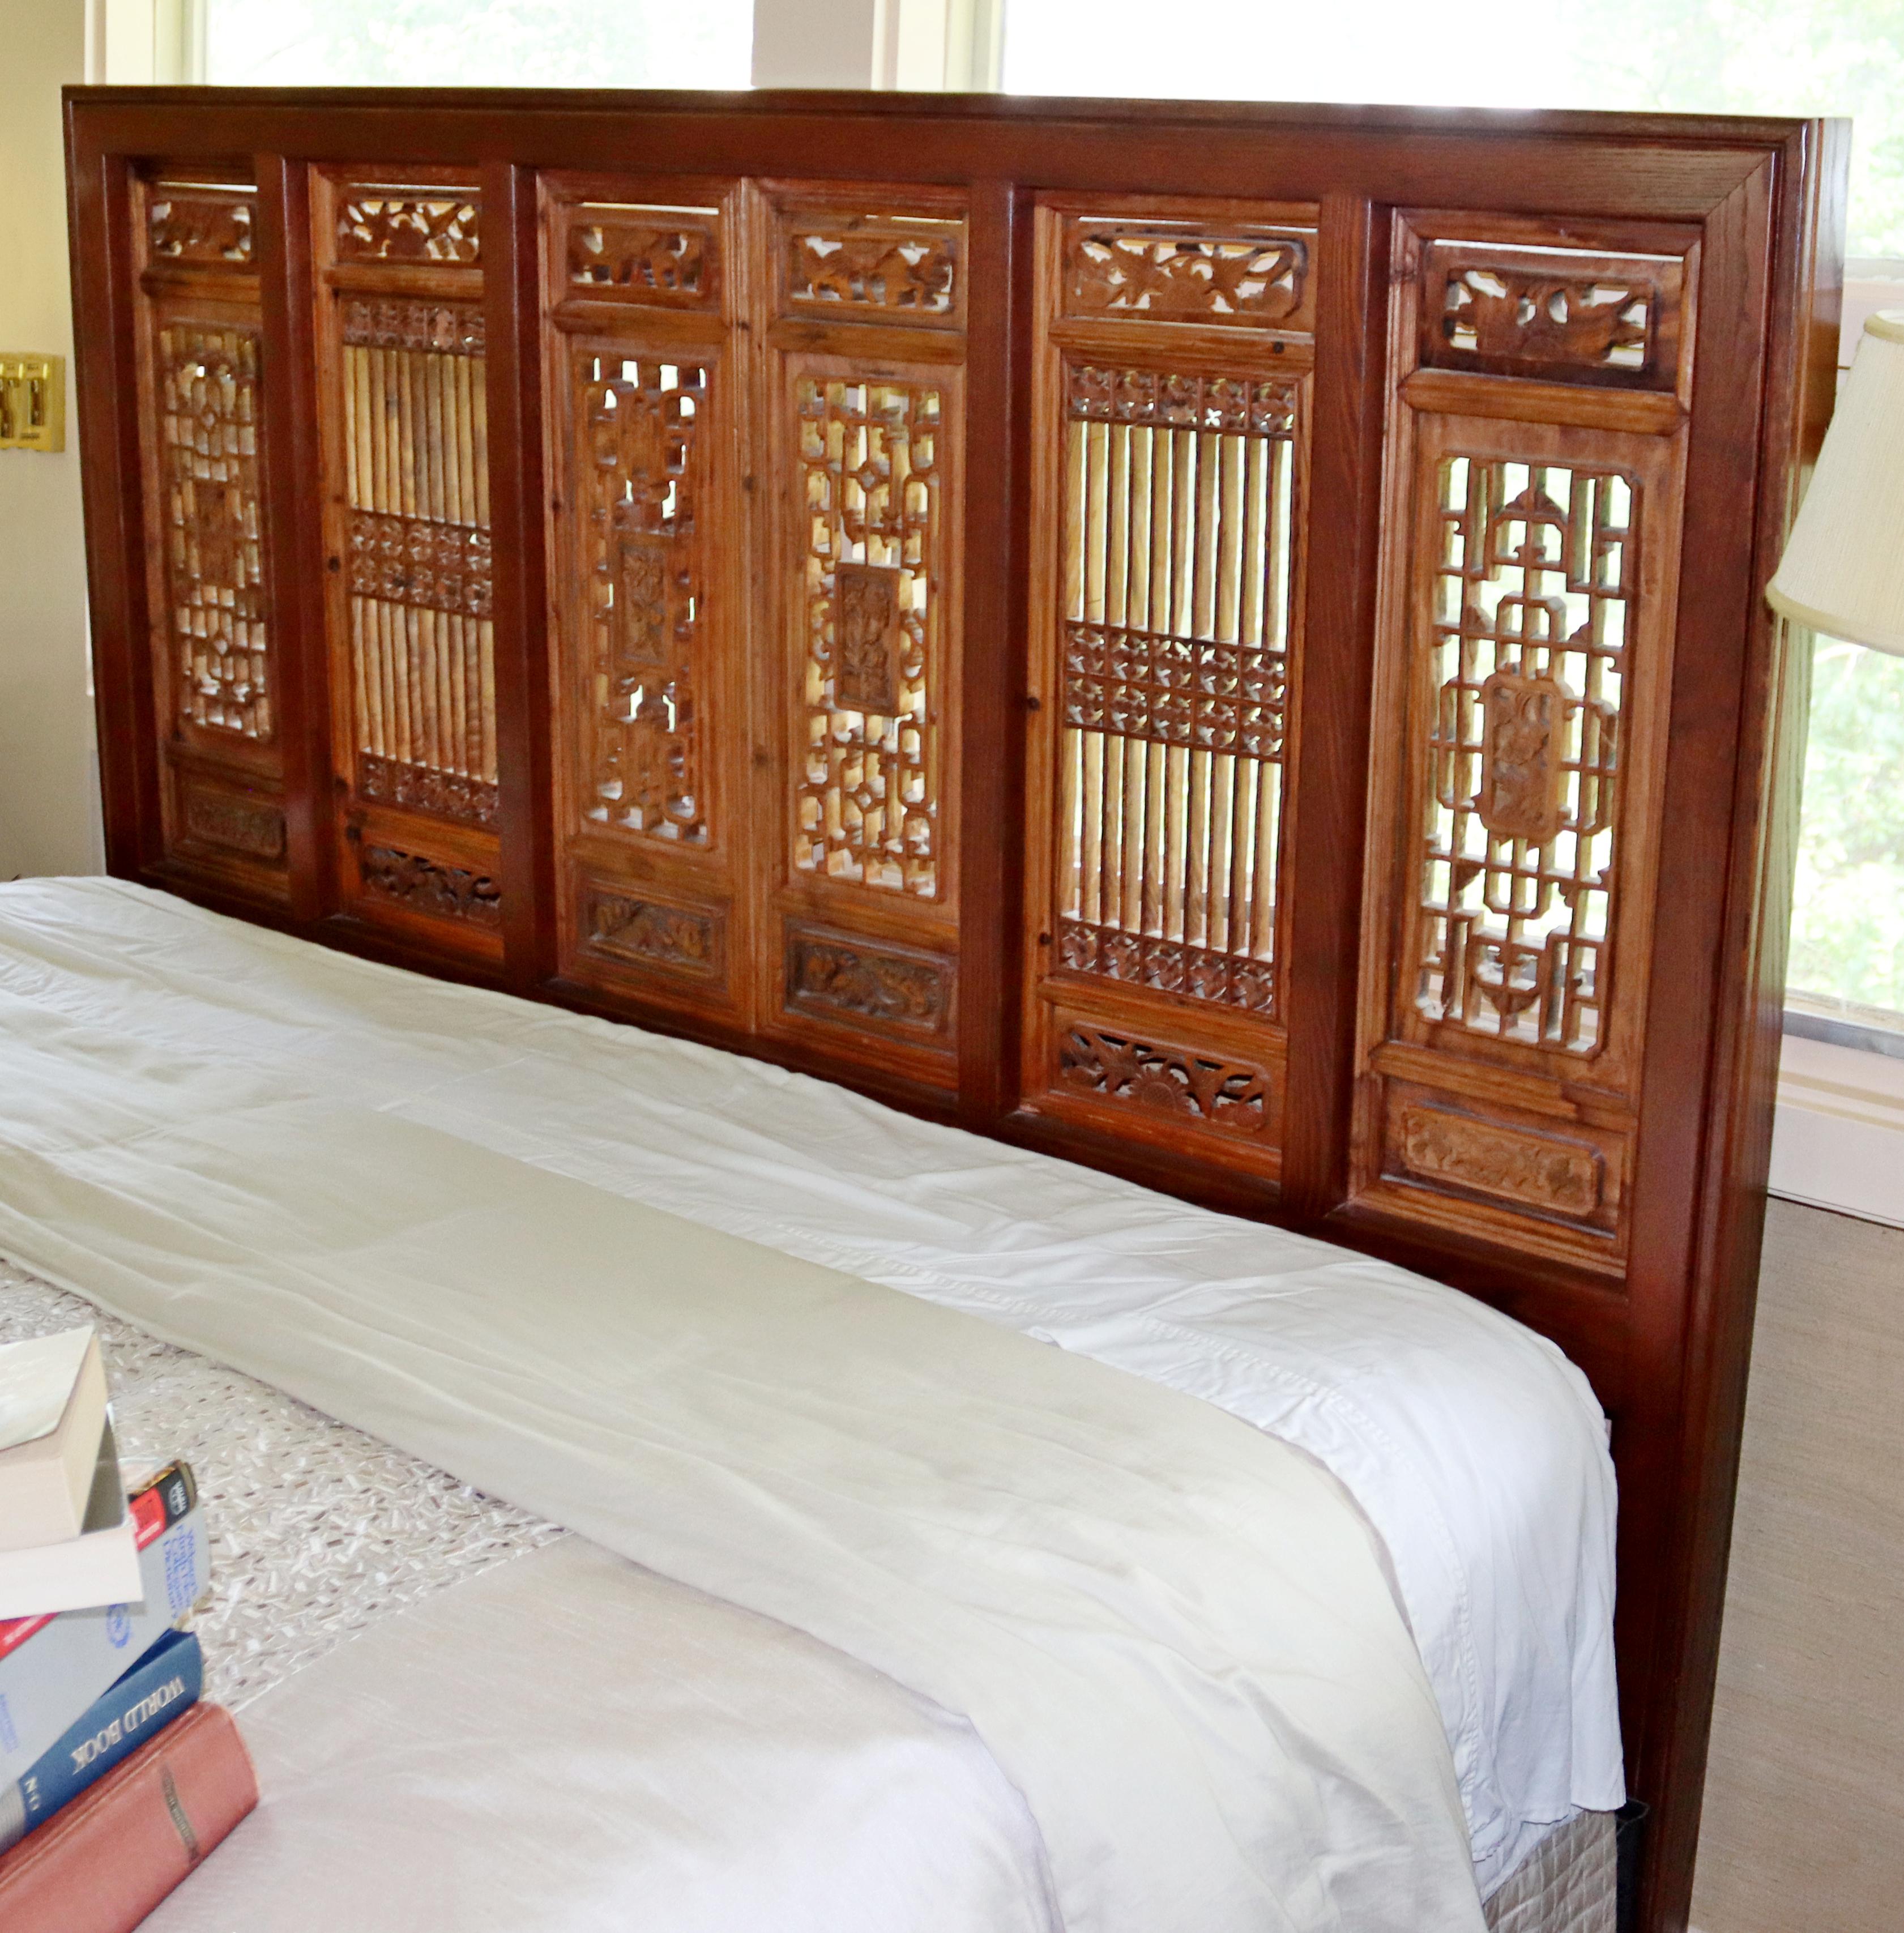 For your consideration is a magnificent, king size, carved wood, Asian style headboard, circa the 1970s. In excellent vintage condition. The dimensions are 78